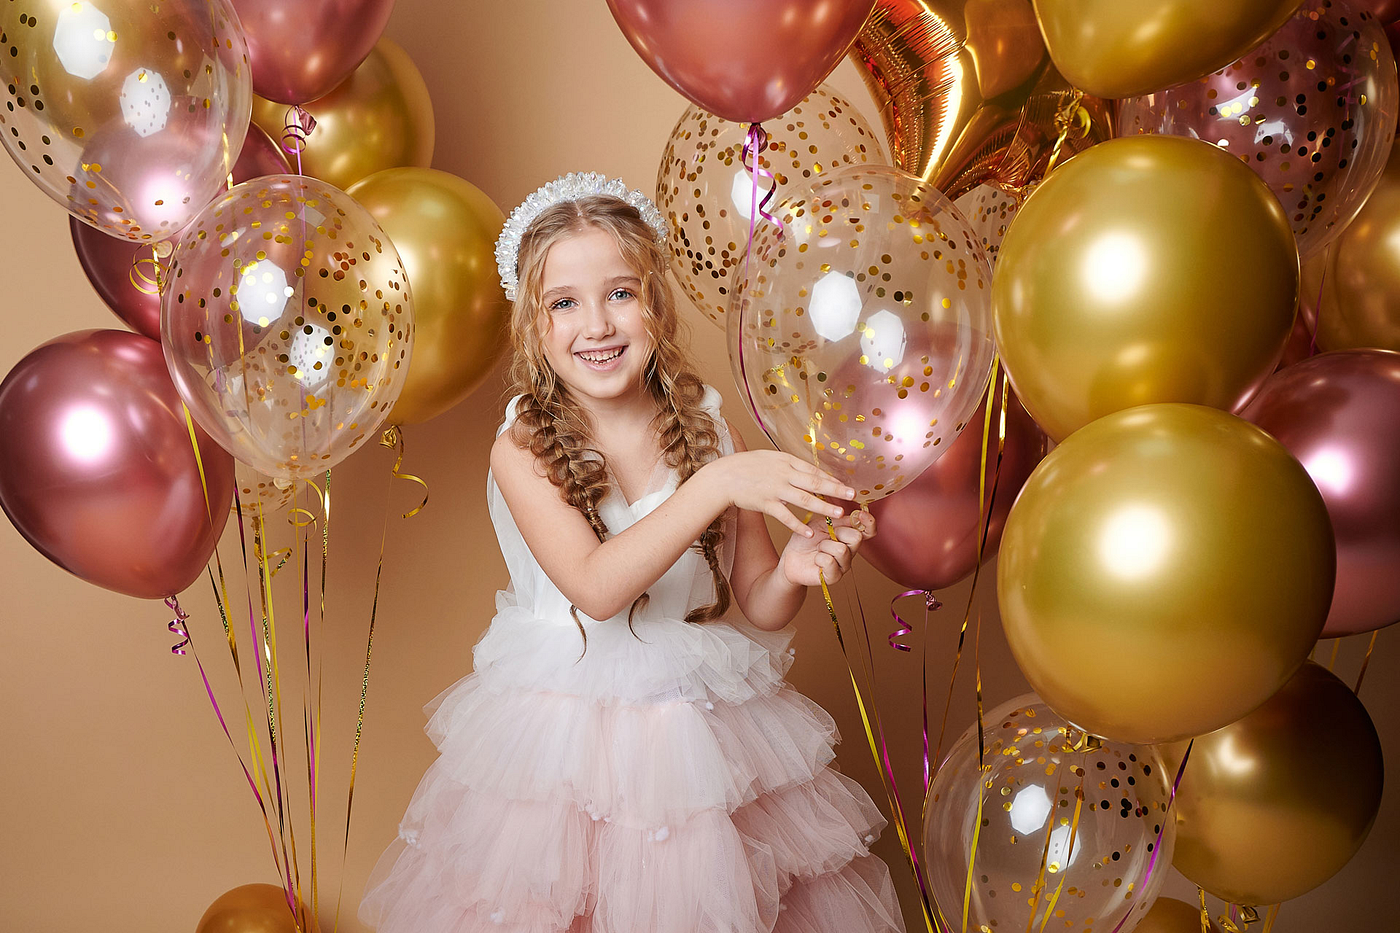 HOW TO DO A PHOTO SHOOT ON BIRTHDAY? SOME SUGGESTIONS FOR A